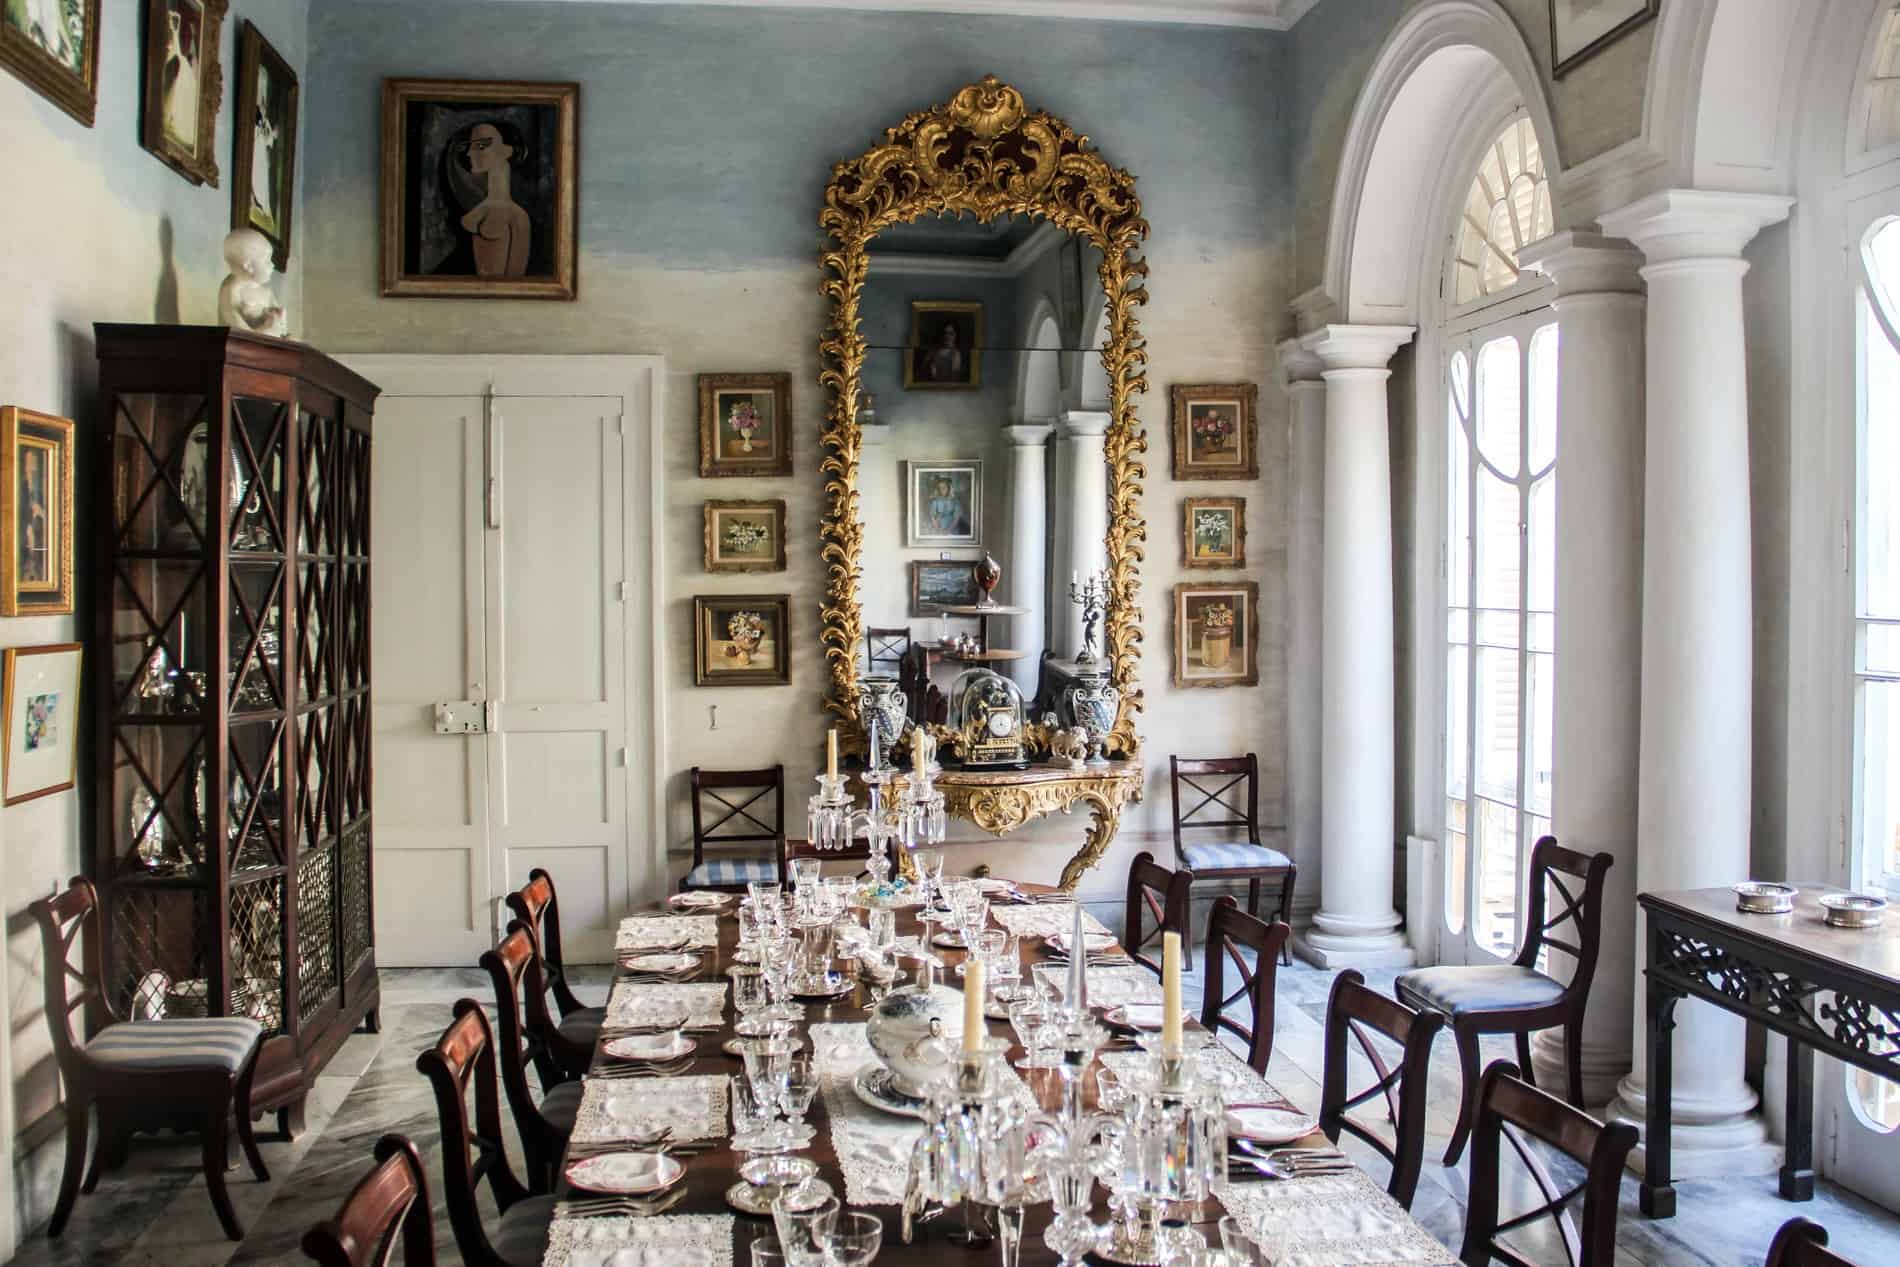 A period furniture dining table, gold gilded mirror, and framed wall artworks in the dining room of Casa Rocca Piccola. 